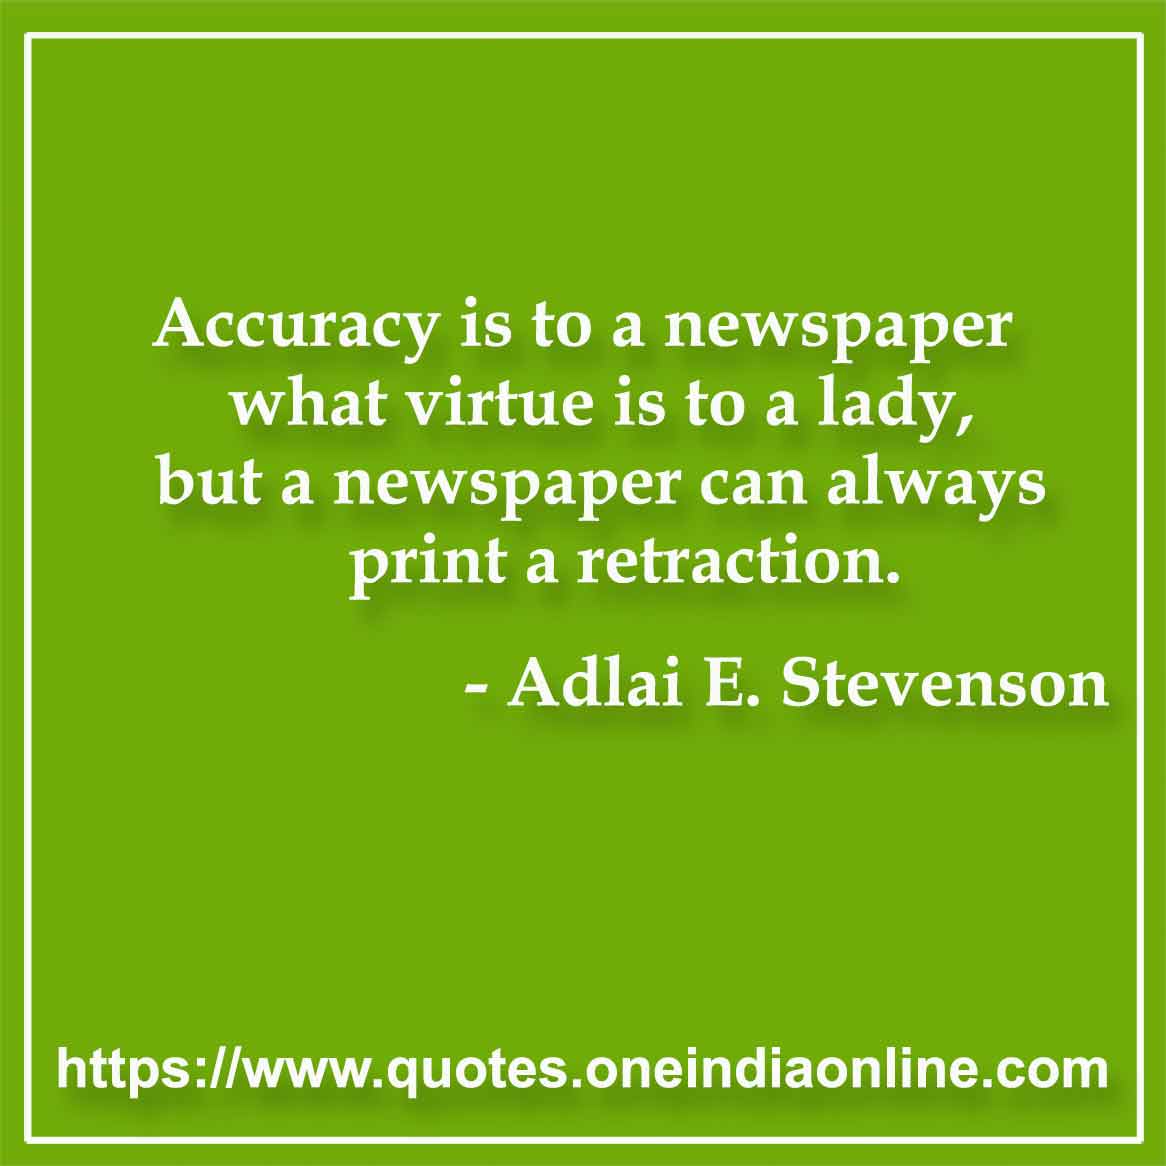 Accuracy is to a newspaper what virtue is to a lady, but a newspaper can always print a retraction.

- Accuracy Quotes by Adlai E. Stevenson